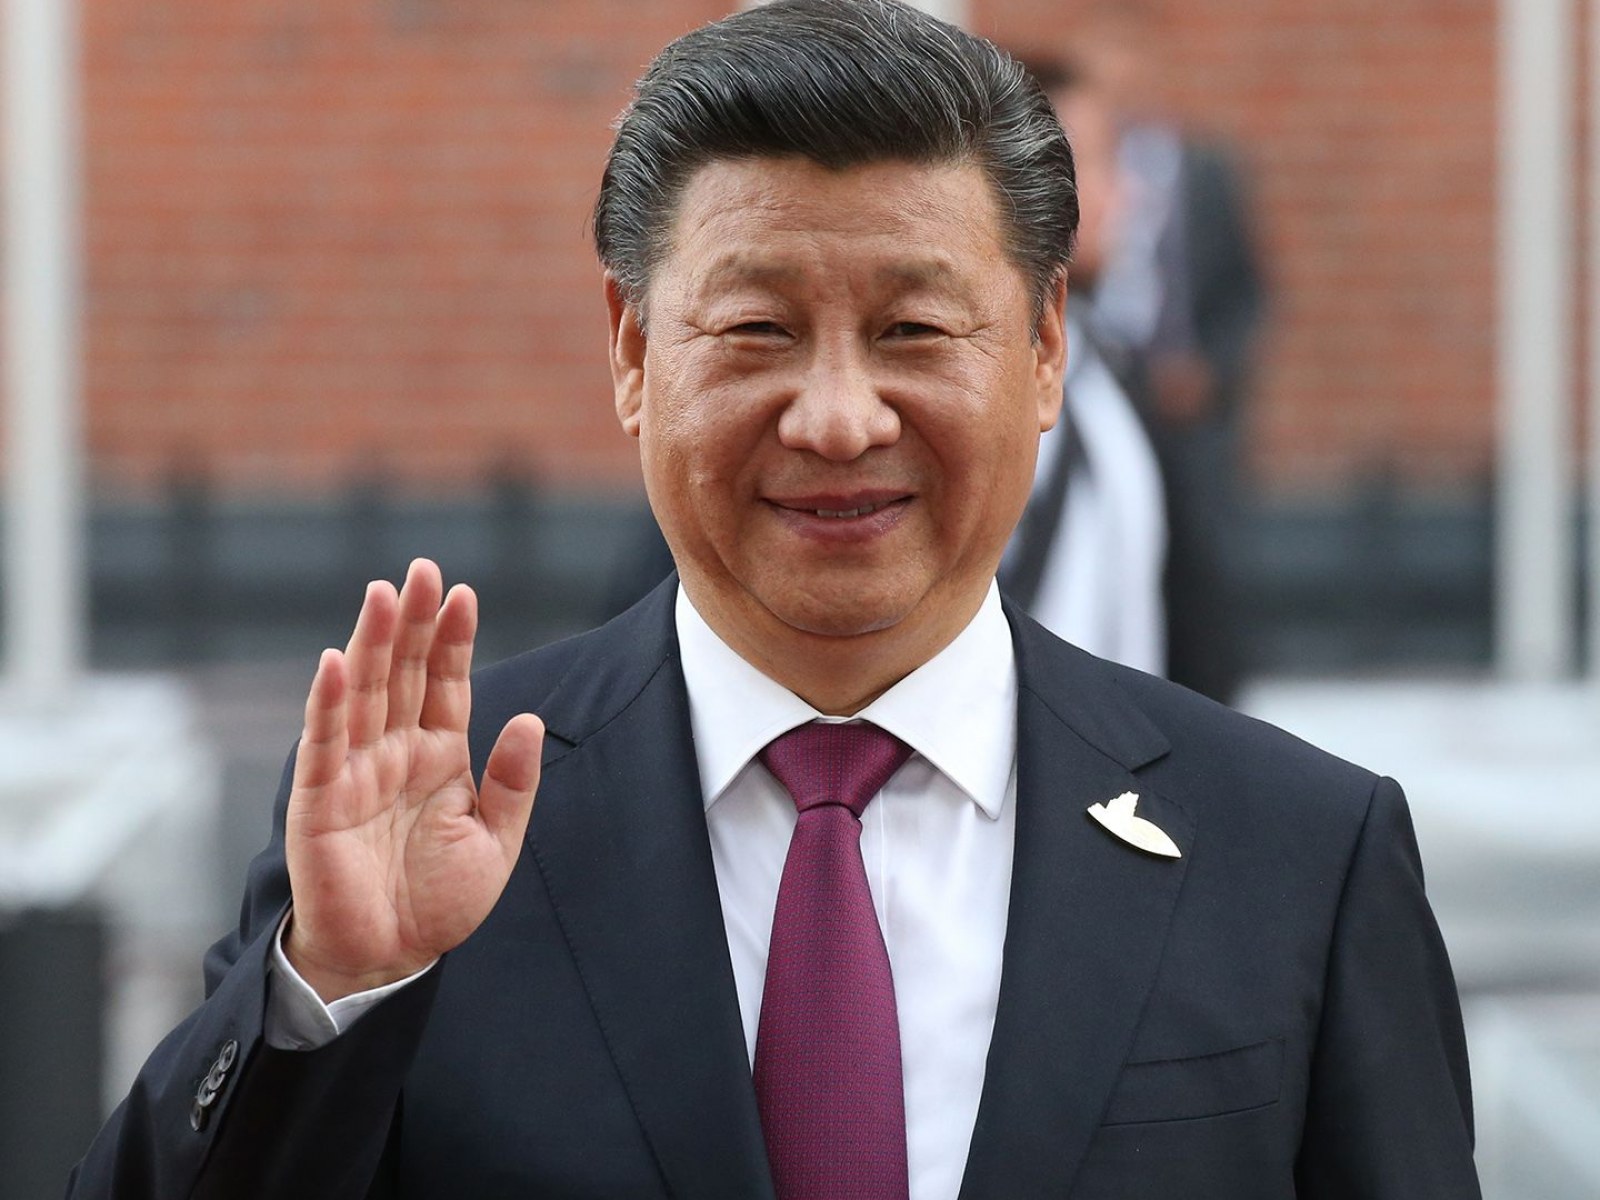 Xi Jinping Offers To Help India Fight Covid: Chinese State Media